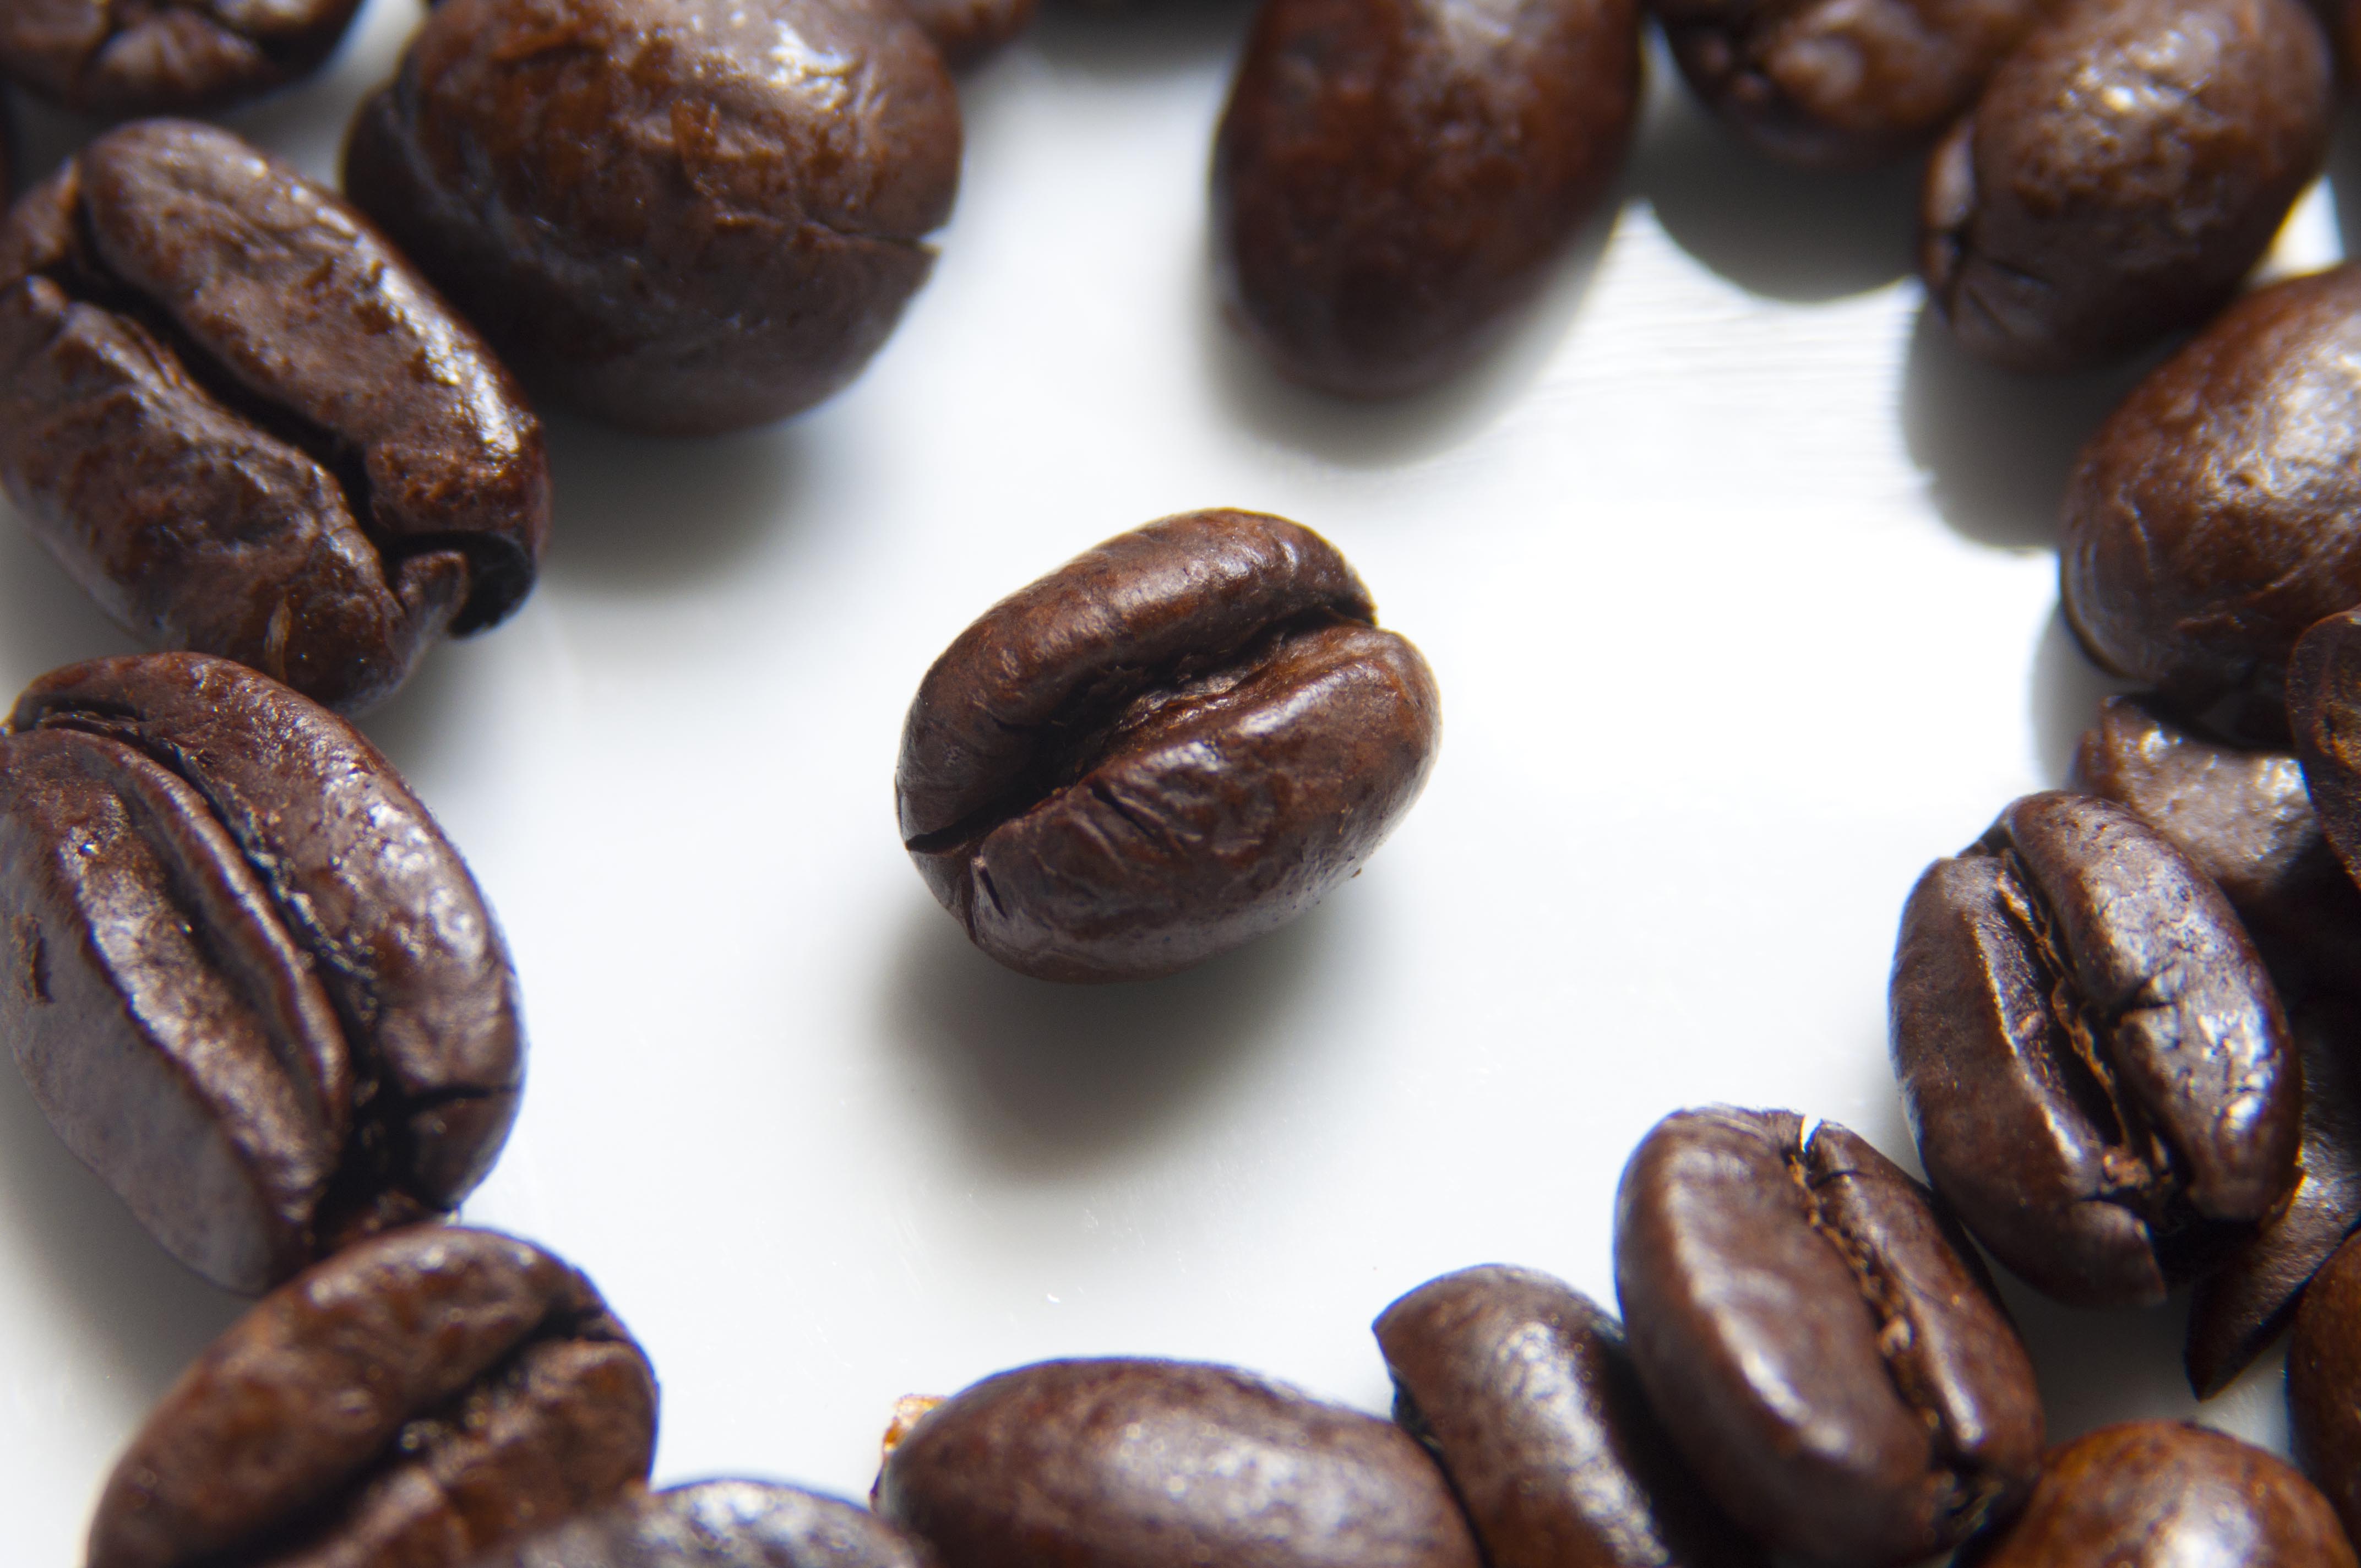 Coffee Advice and Other Tips to Get your Day Started Right